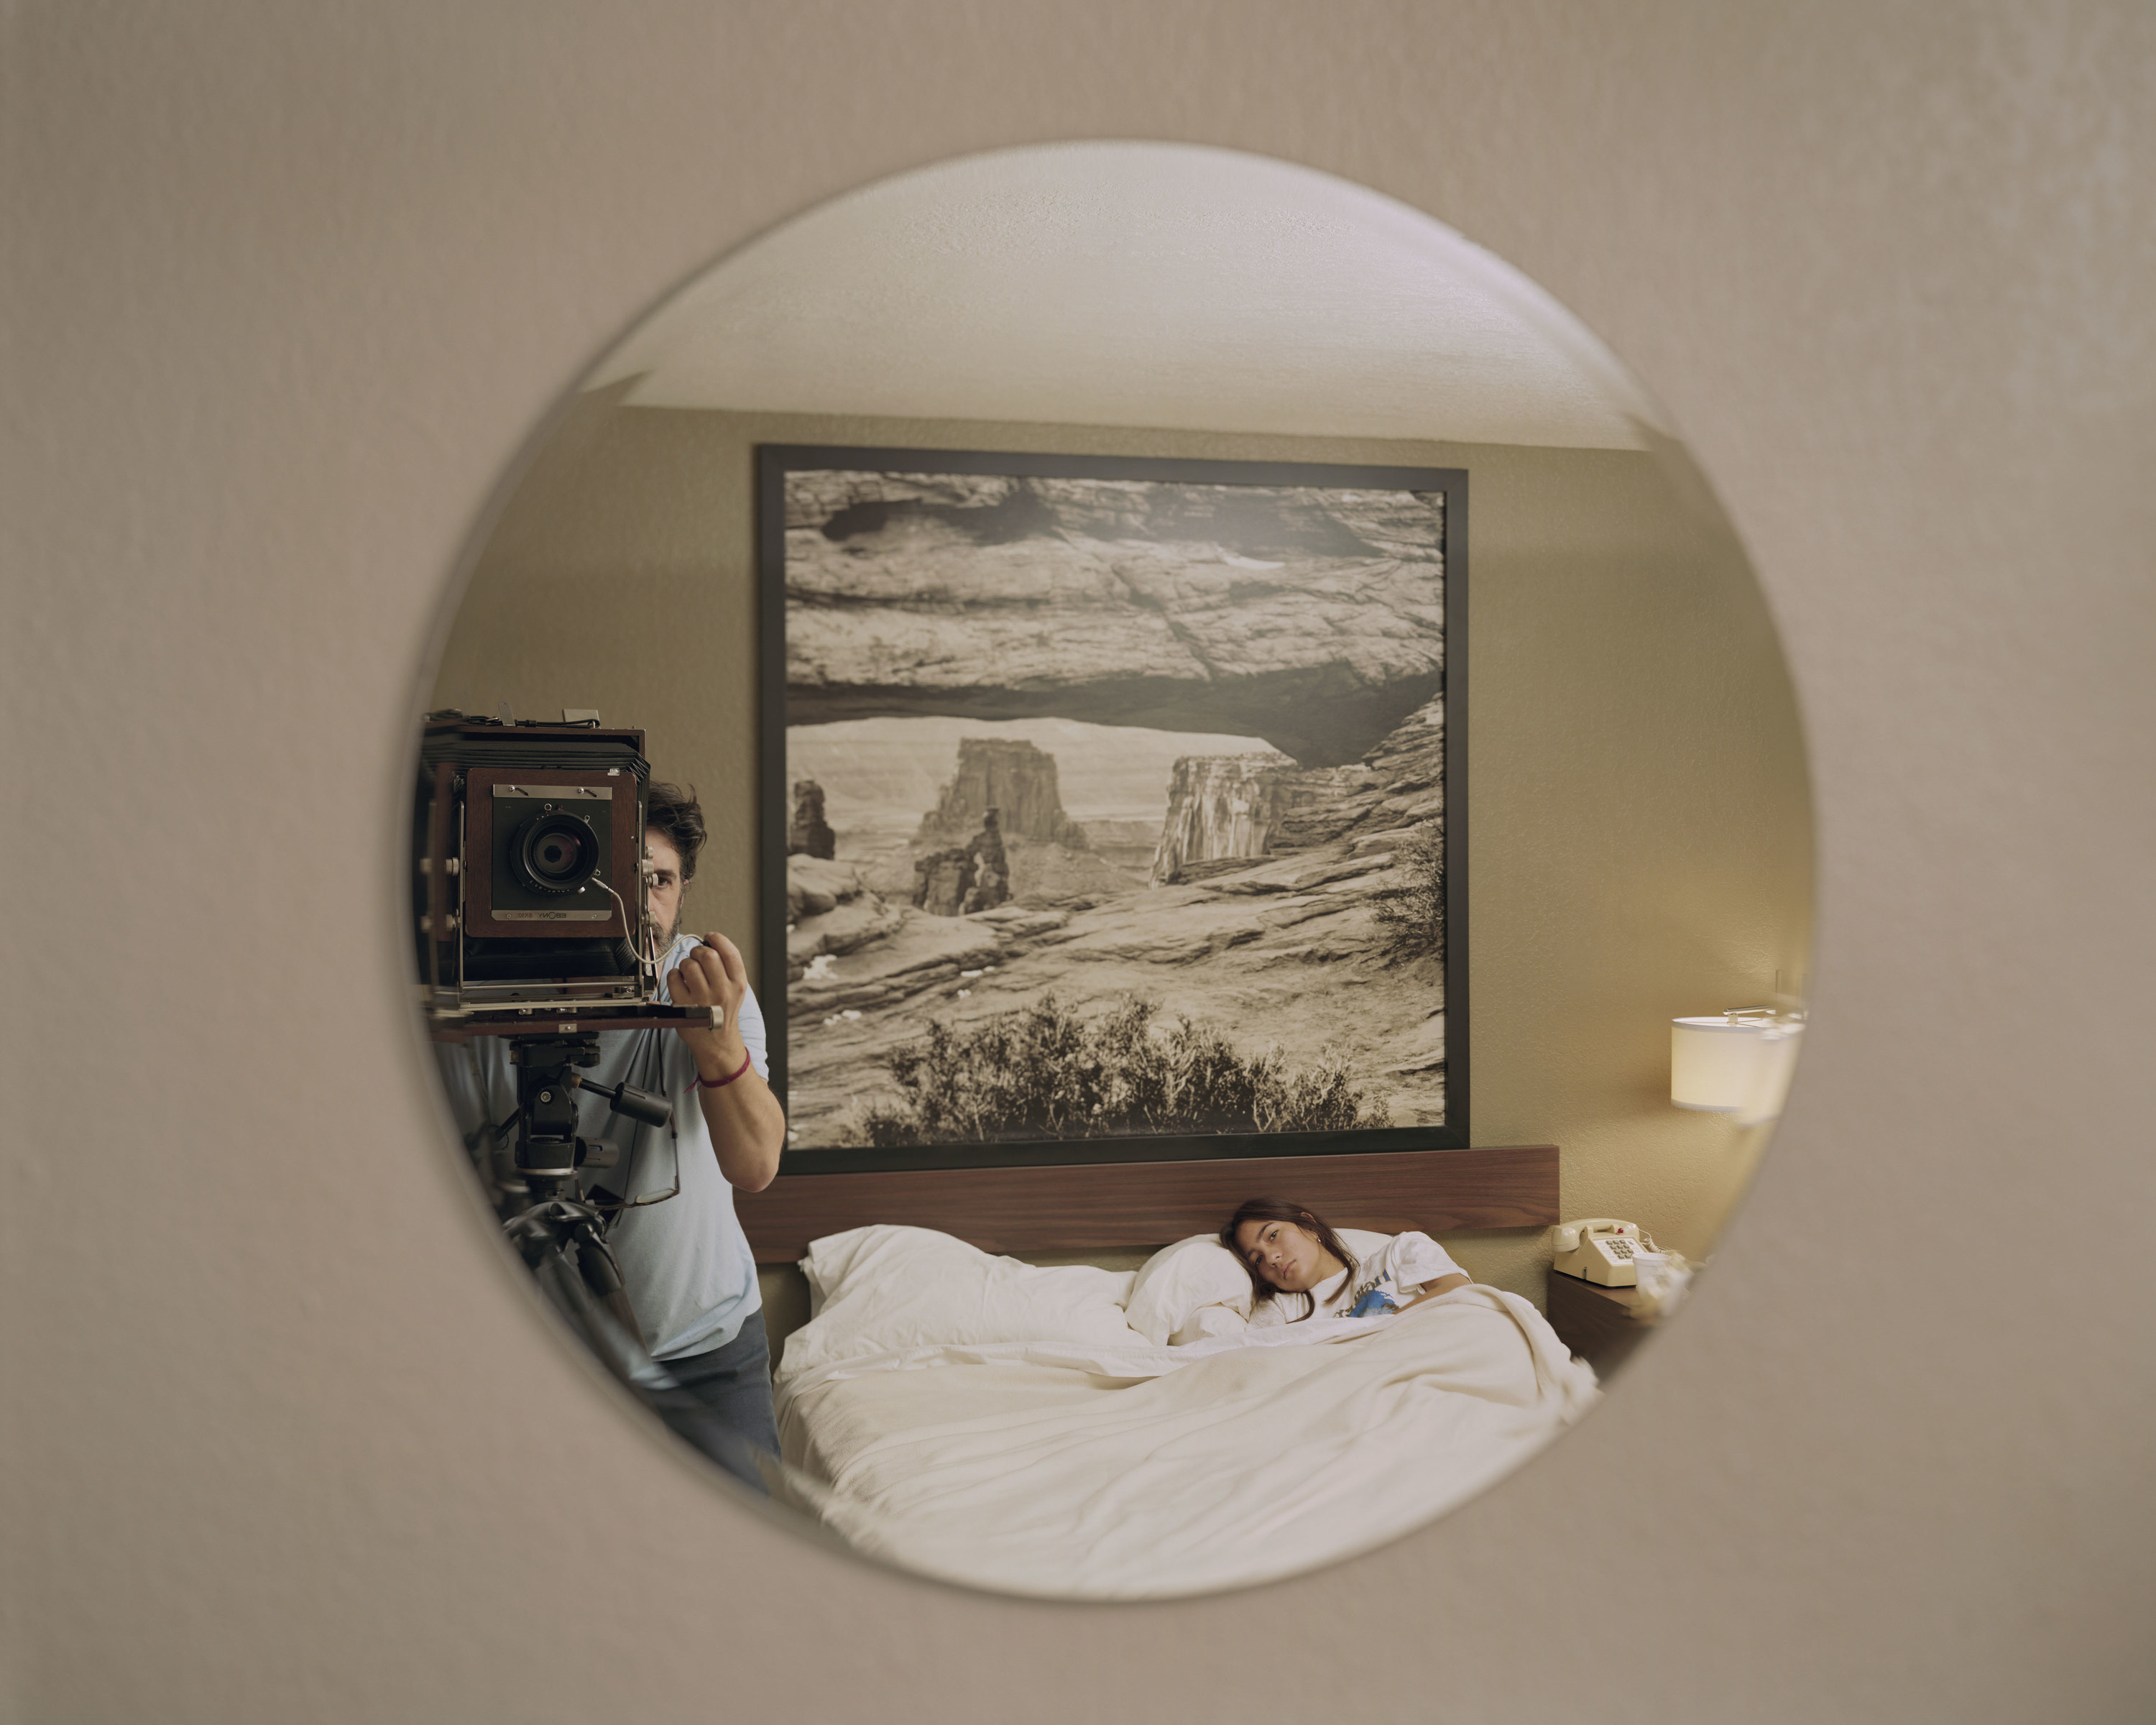 Alec Soth with a large format camera in a round mirror reflecting him and his daughter in bed